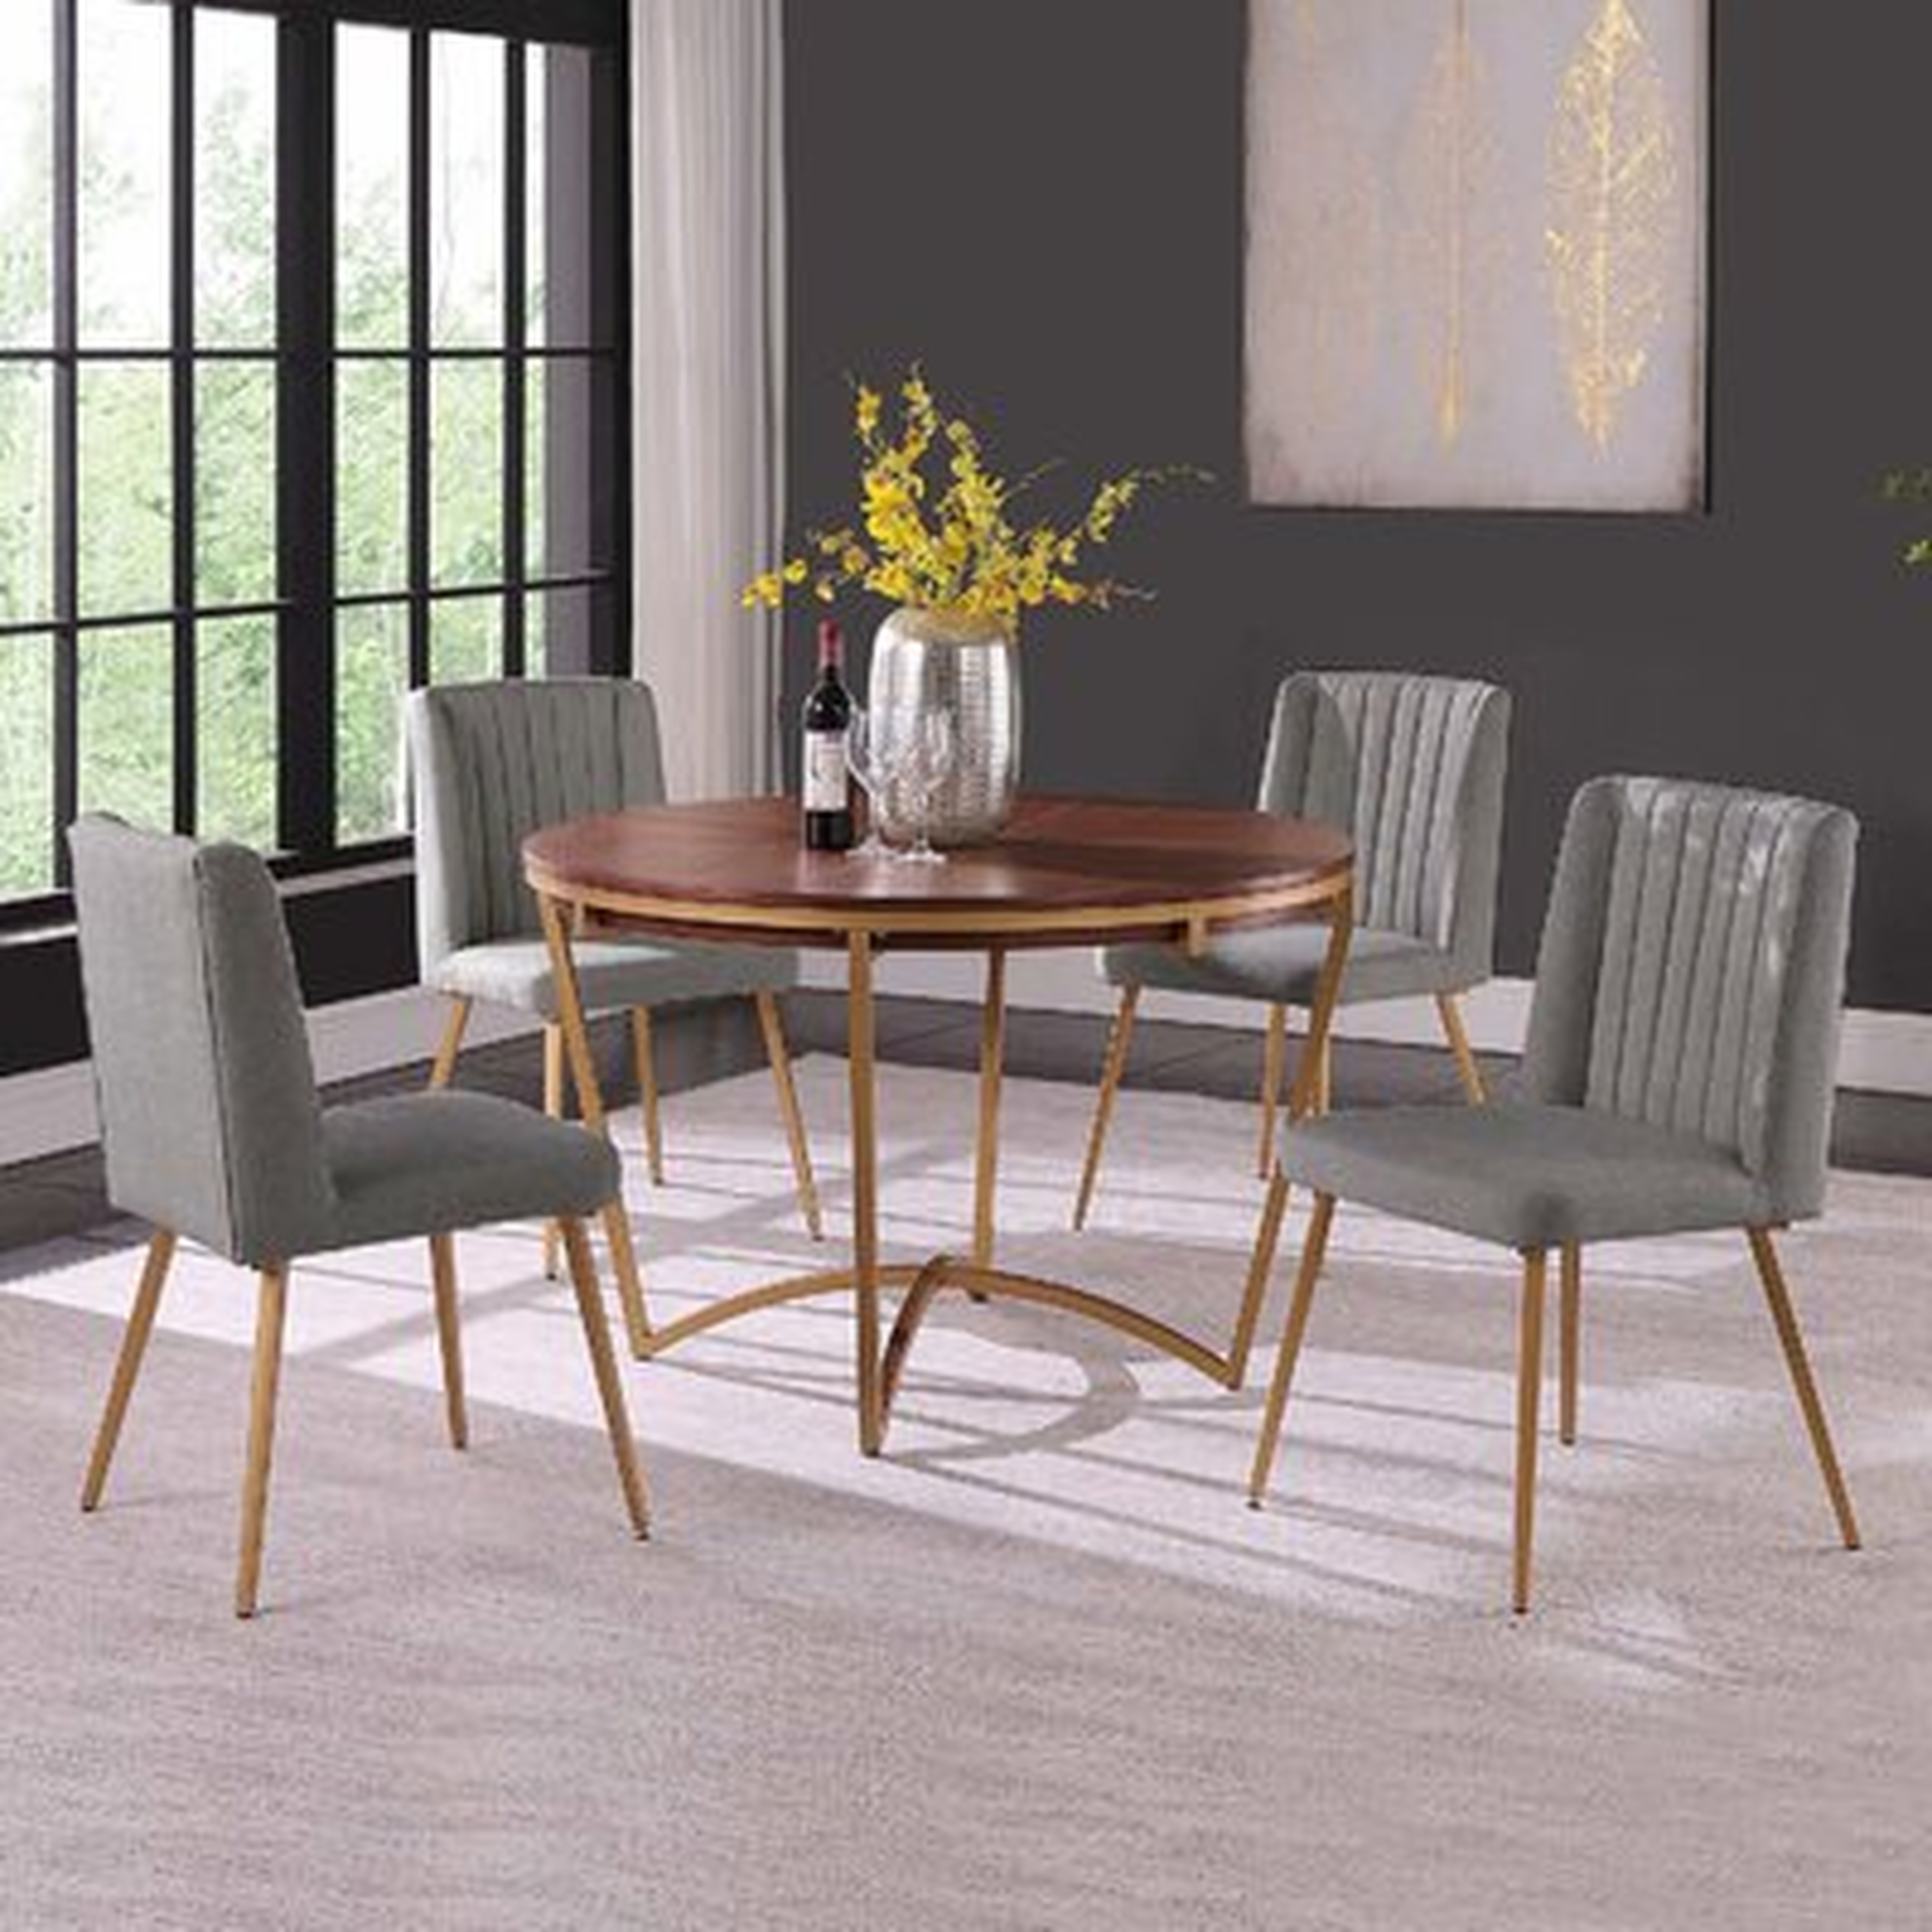 5 Pieces Round Dining Set With 4 Chairs For Modern Home Or Restaurant (Red Round Table + Beige Chair) - Wayfair